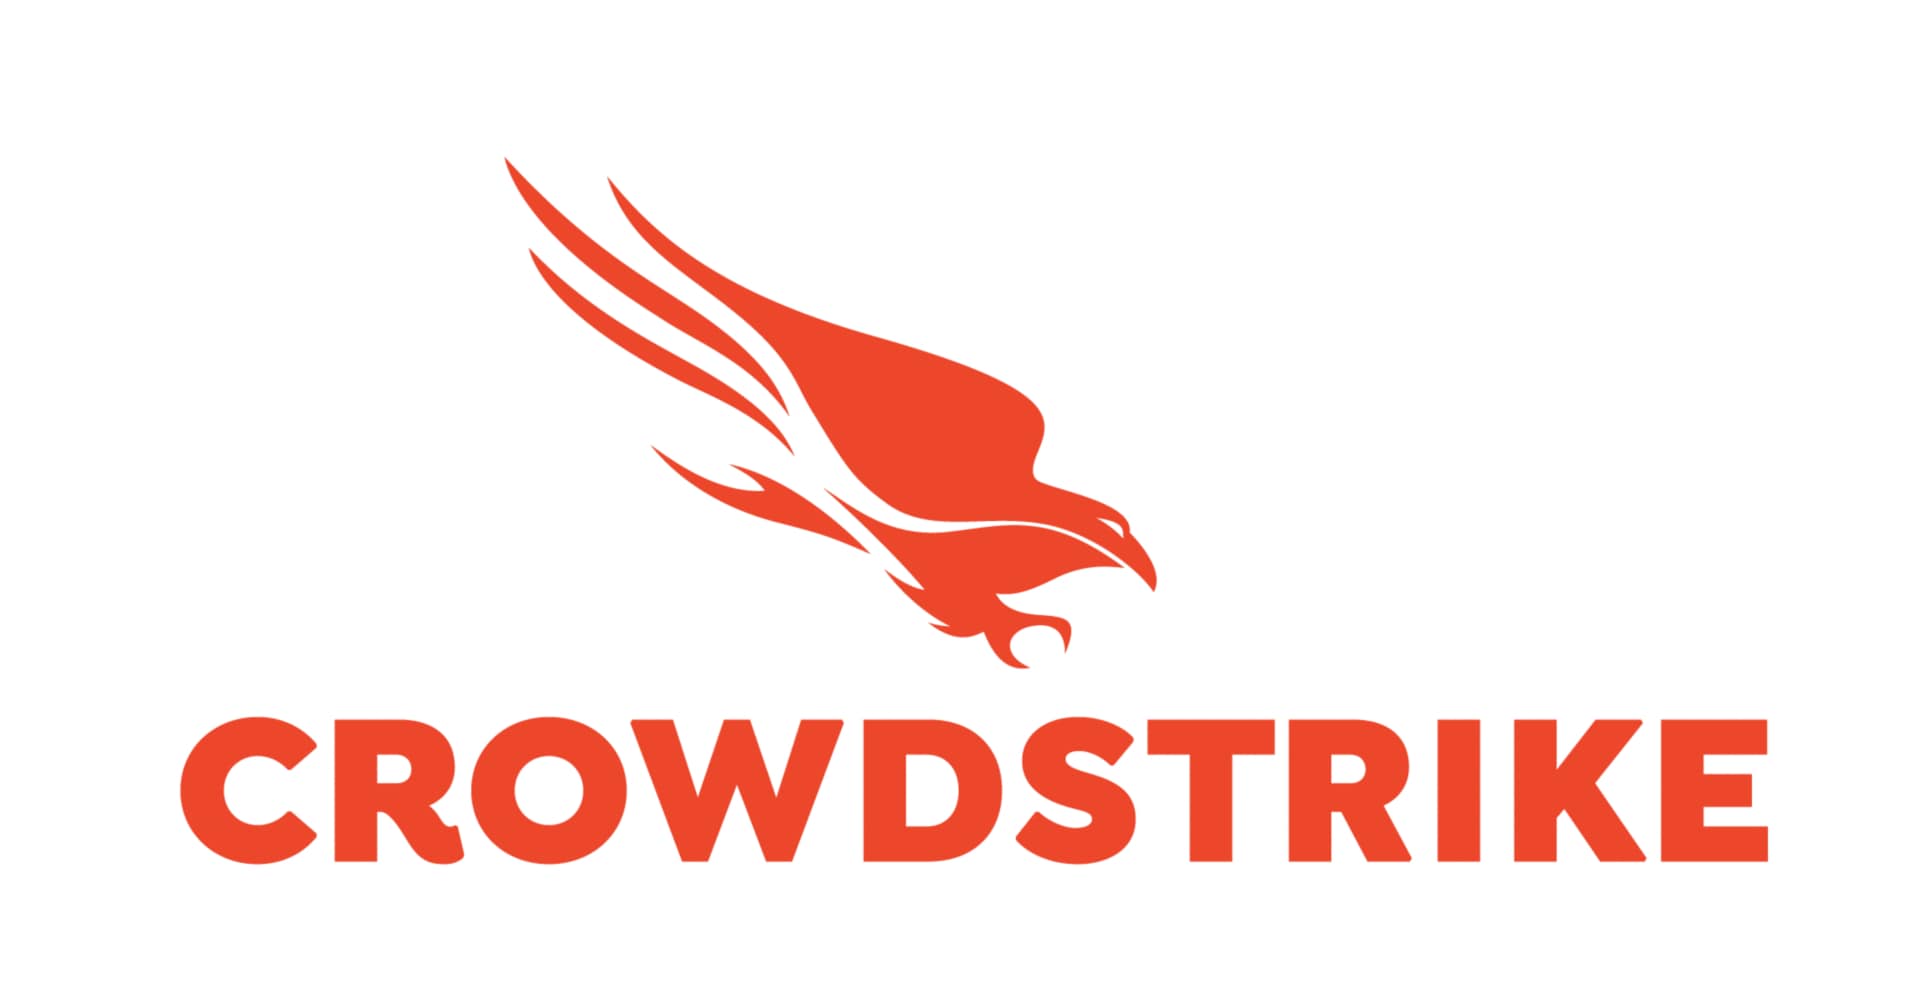 CrowdStrike Insight for Mobile (Requires Falcon for Mobile) Software